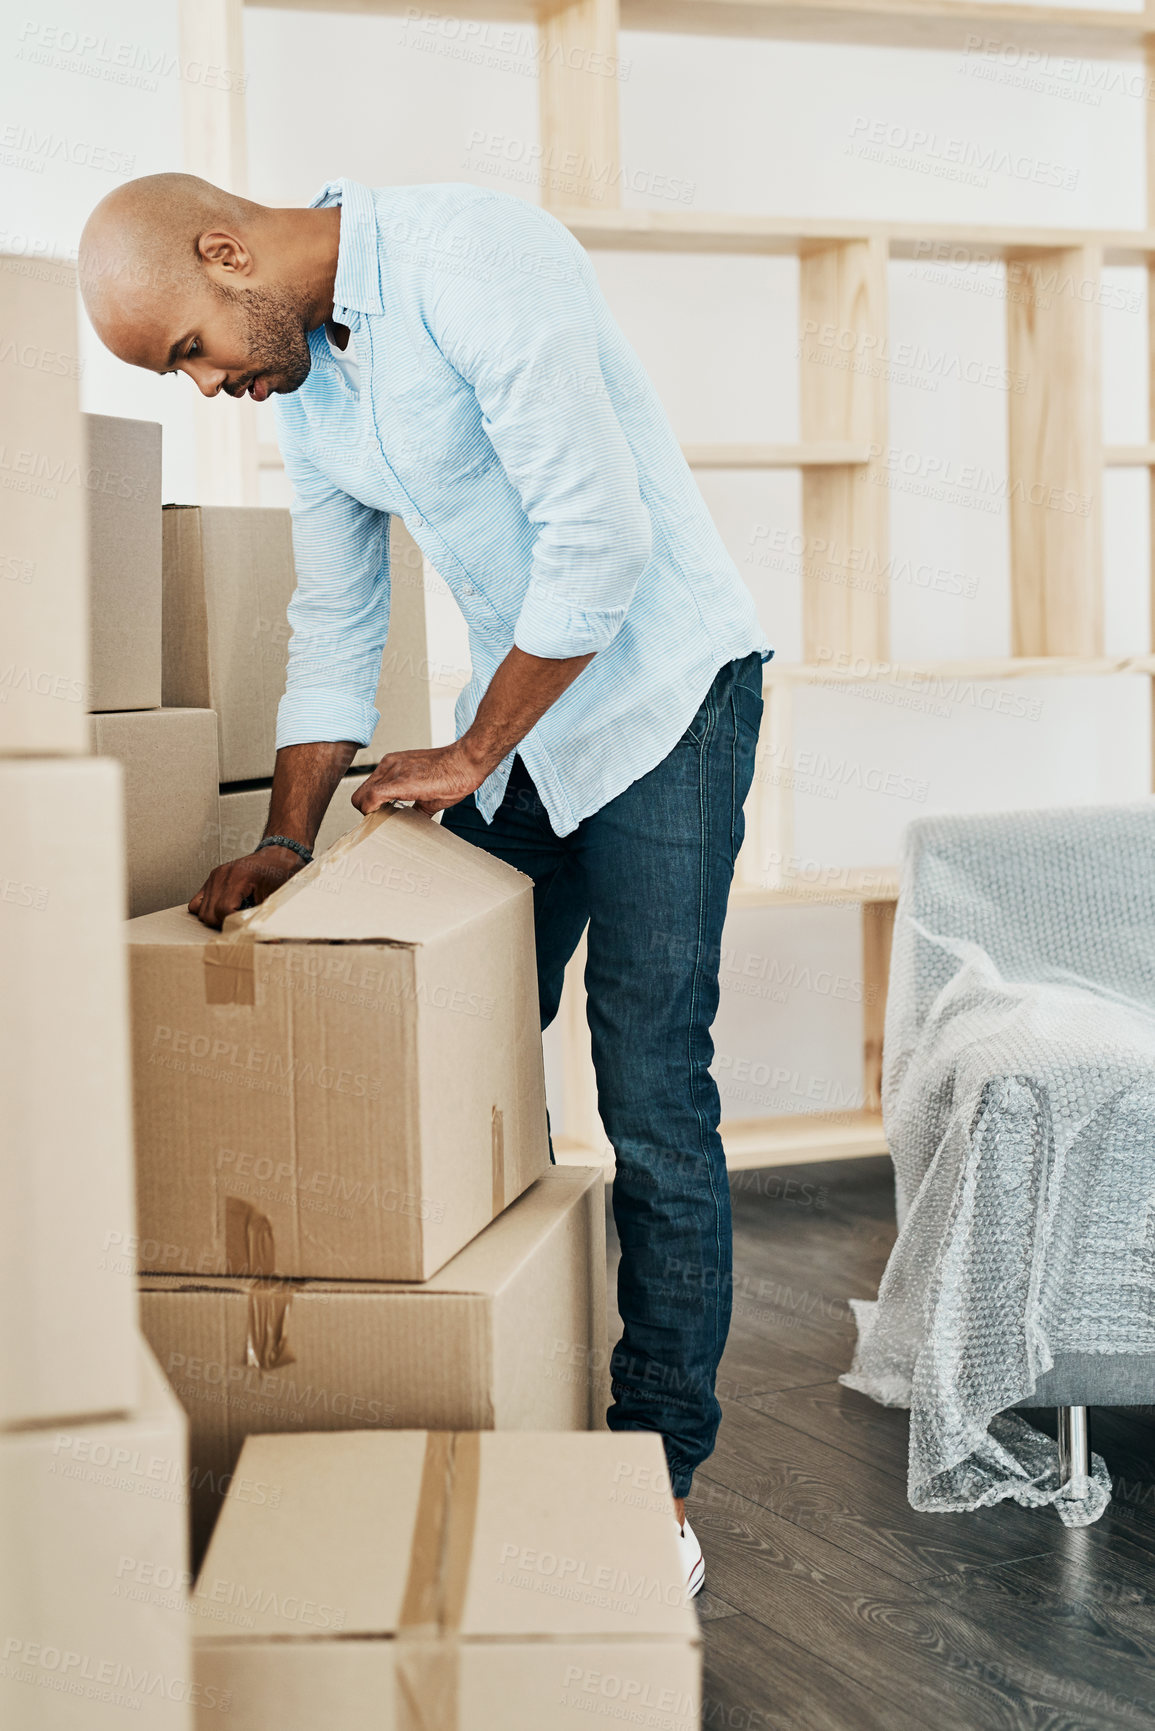 Buy stock photo Shot of a young man unpacking boxes while moving house